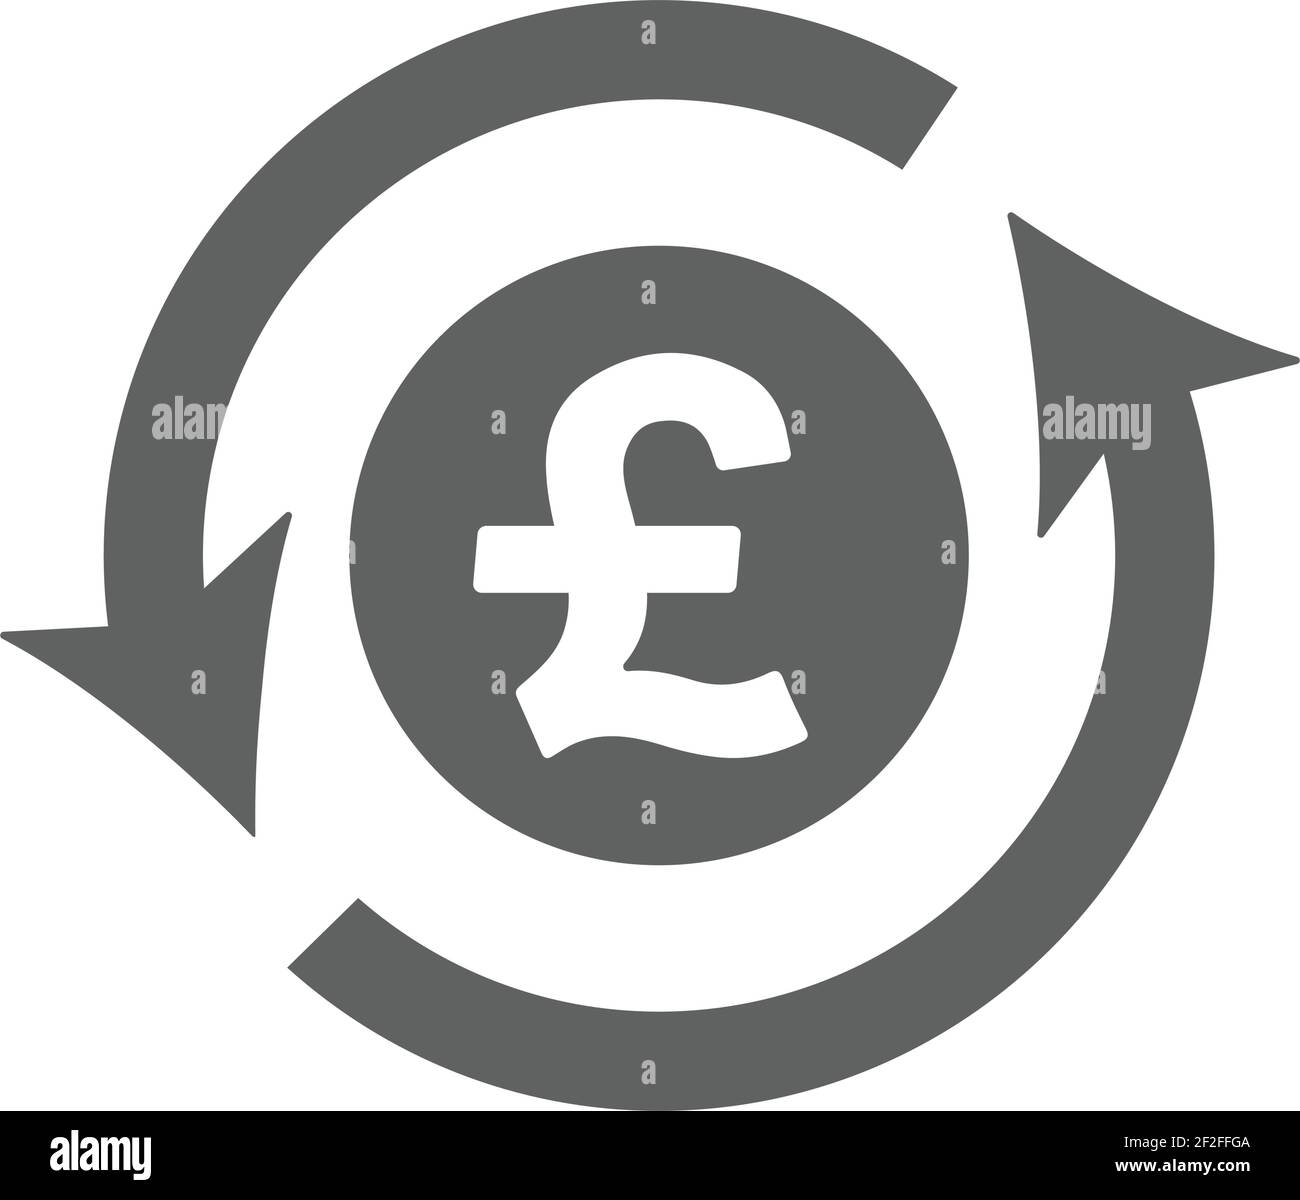 Pound sterling arrow money circulation icon. Well organized and editable Vector design using in commercial purposes, print media, web or any type of d Stock Vector